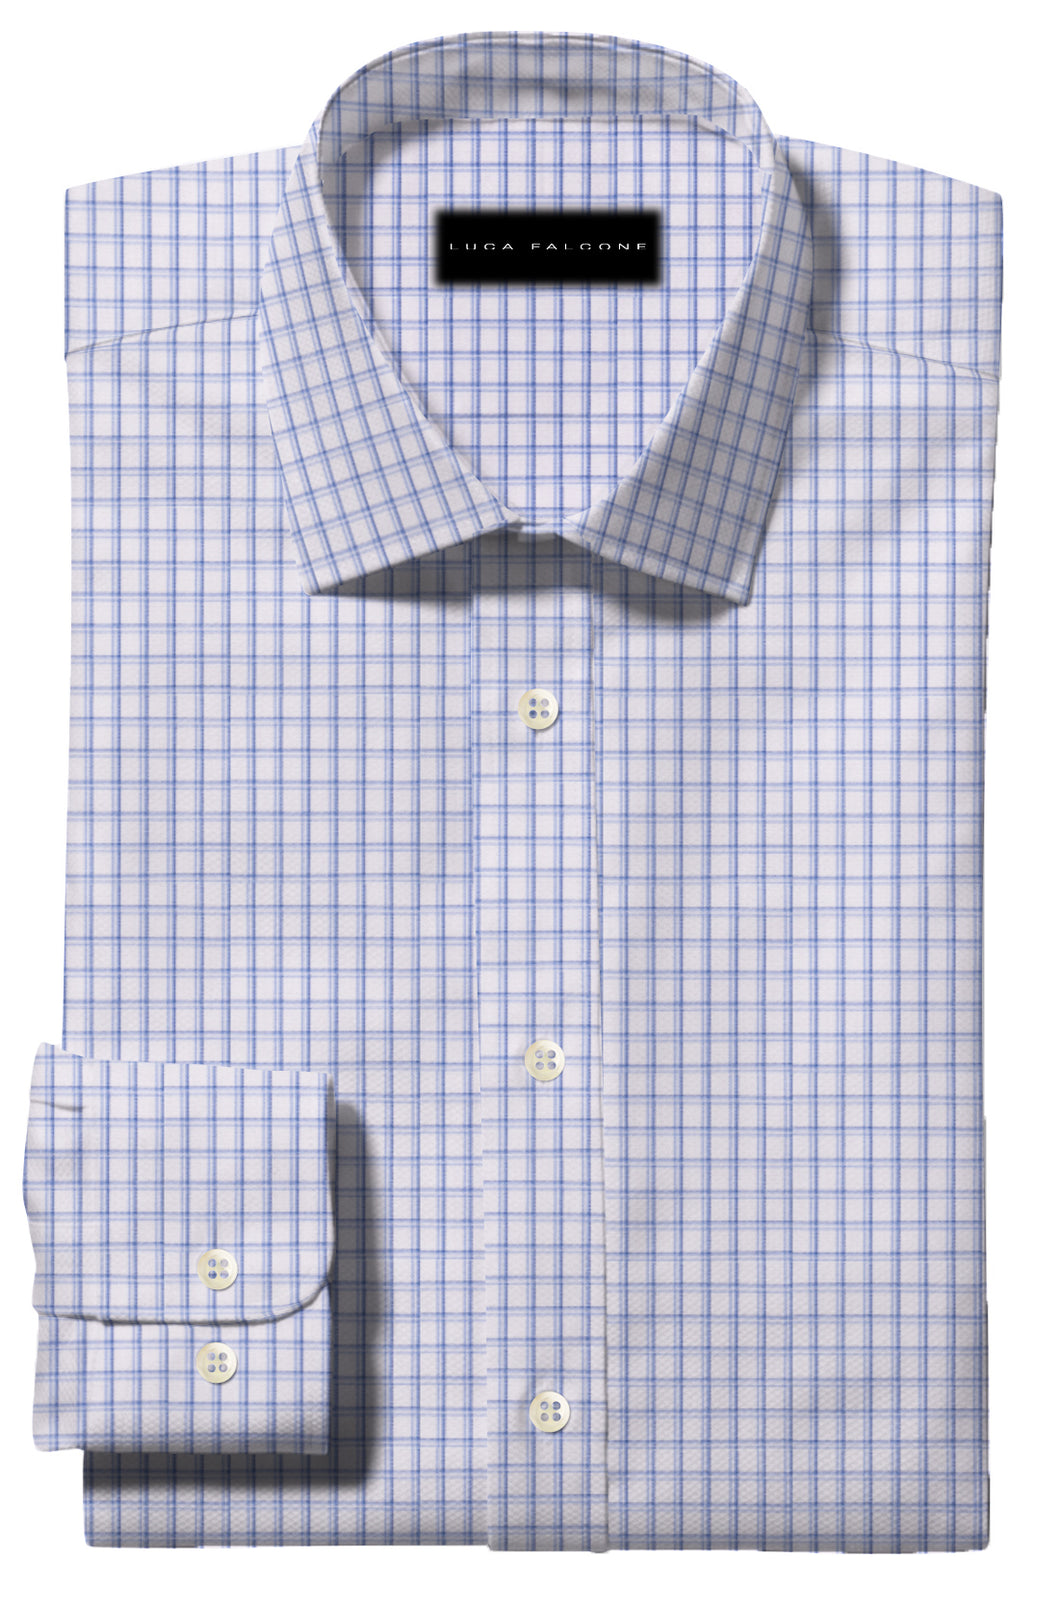 Blue Double Check Pattern